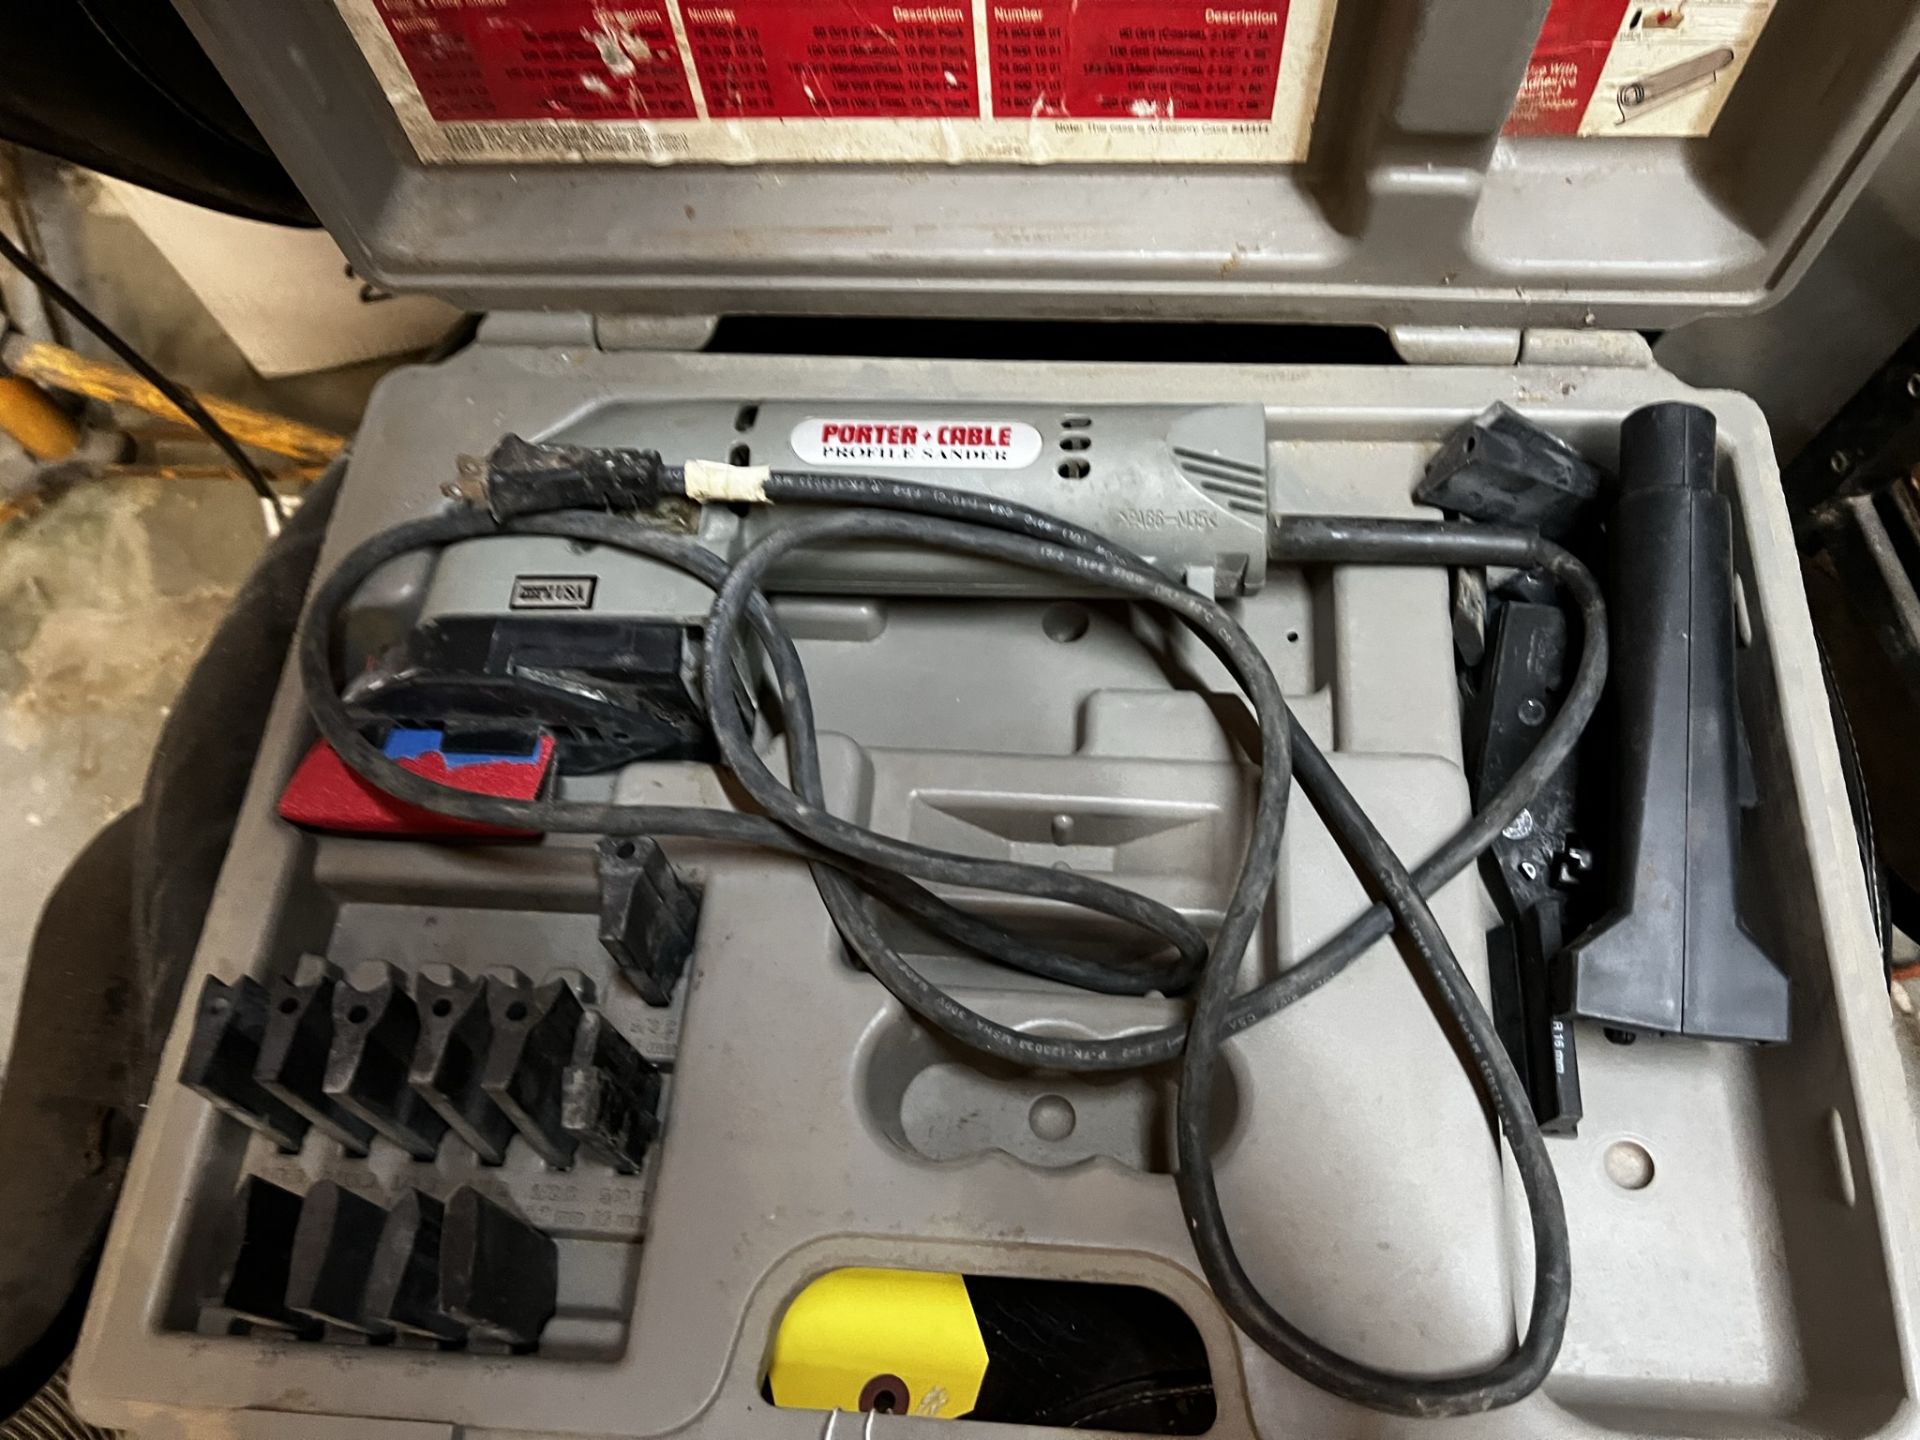 PORTER CABLE PROFILE SANDER IN CASE (LOCATED IN WEST PALM BEACH, FL)